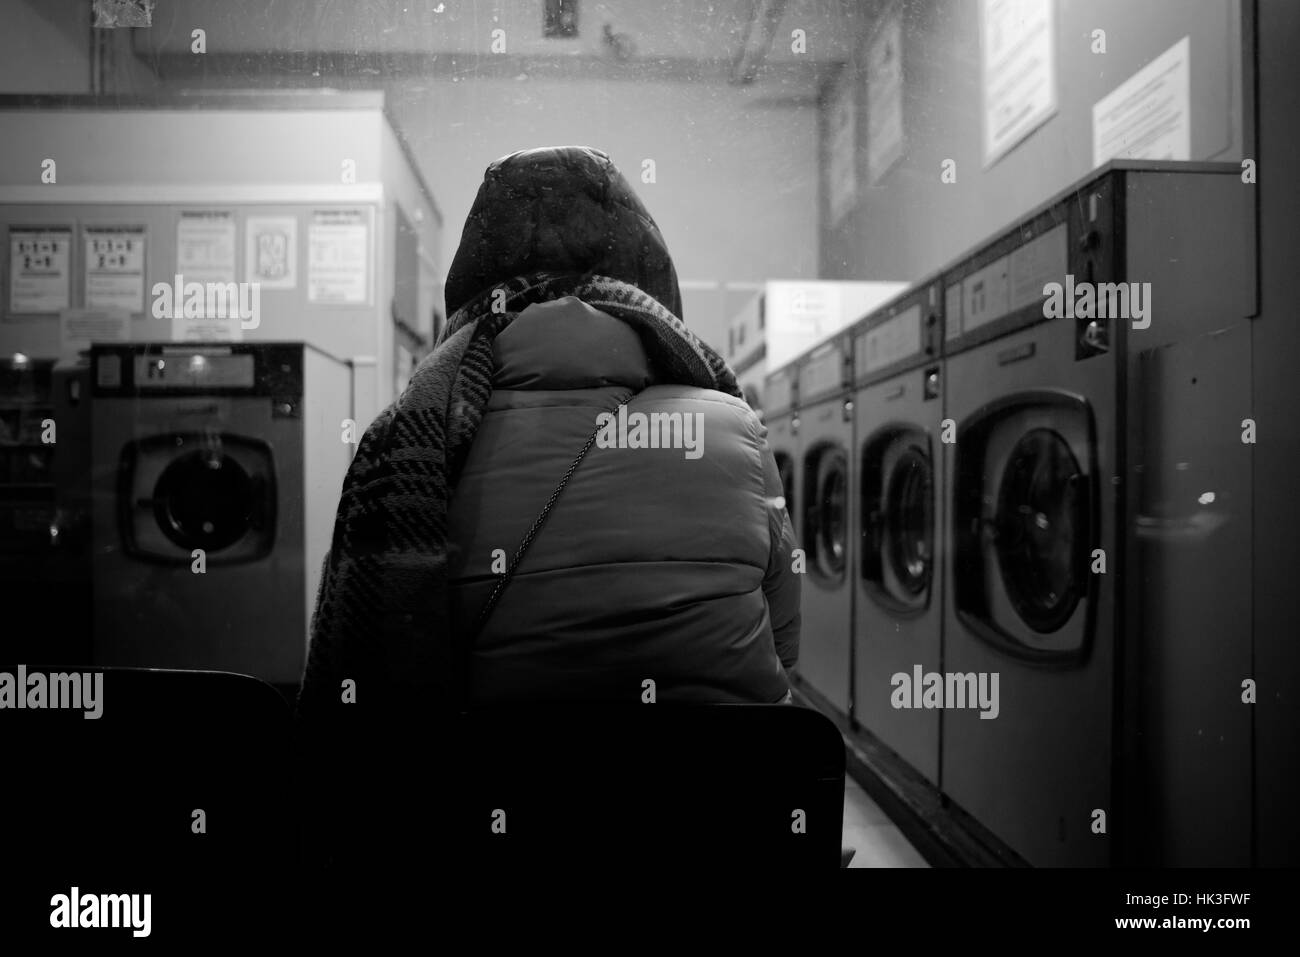 Person in a automatic laundry room Stock Photo